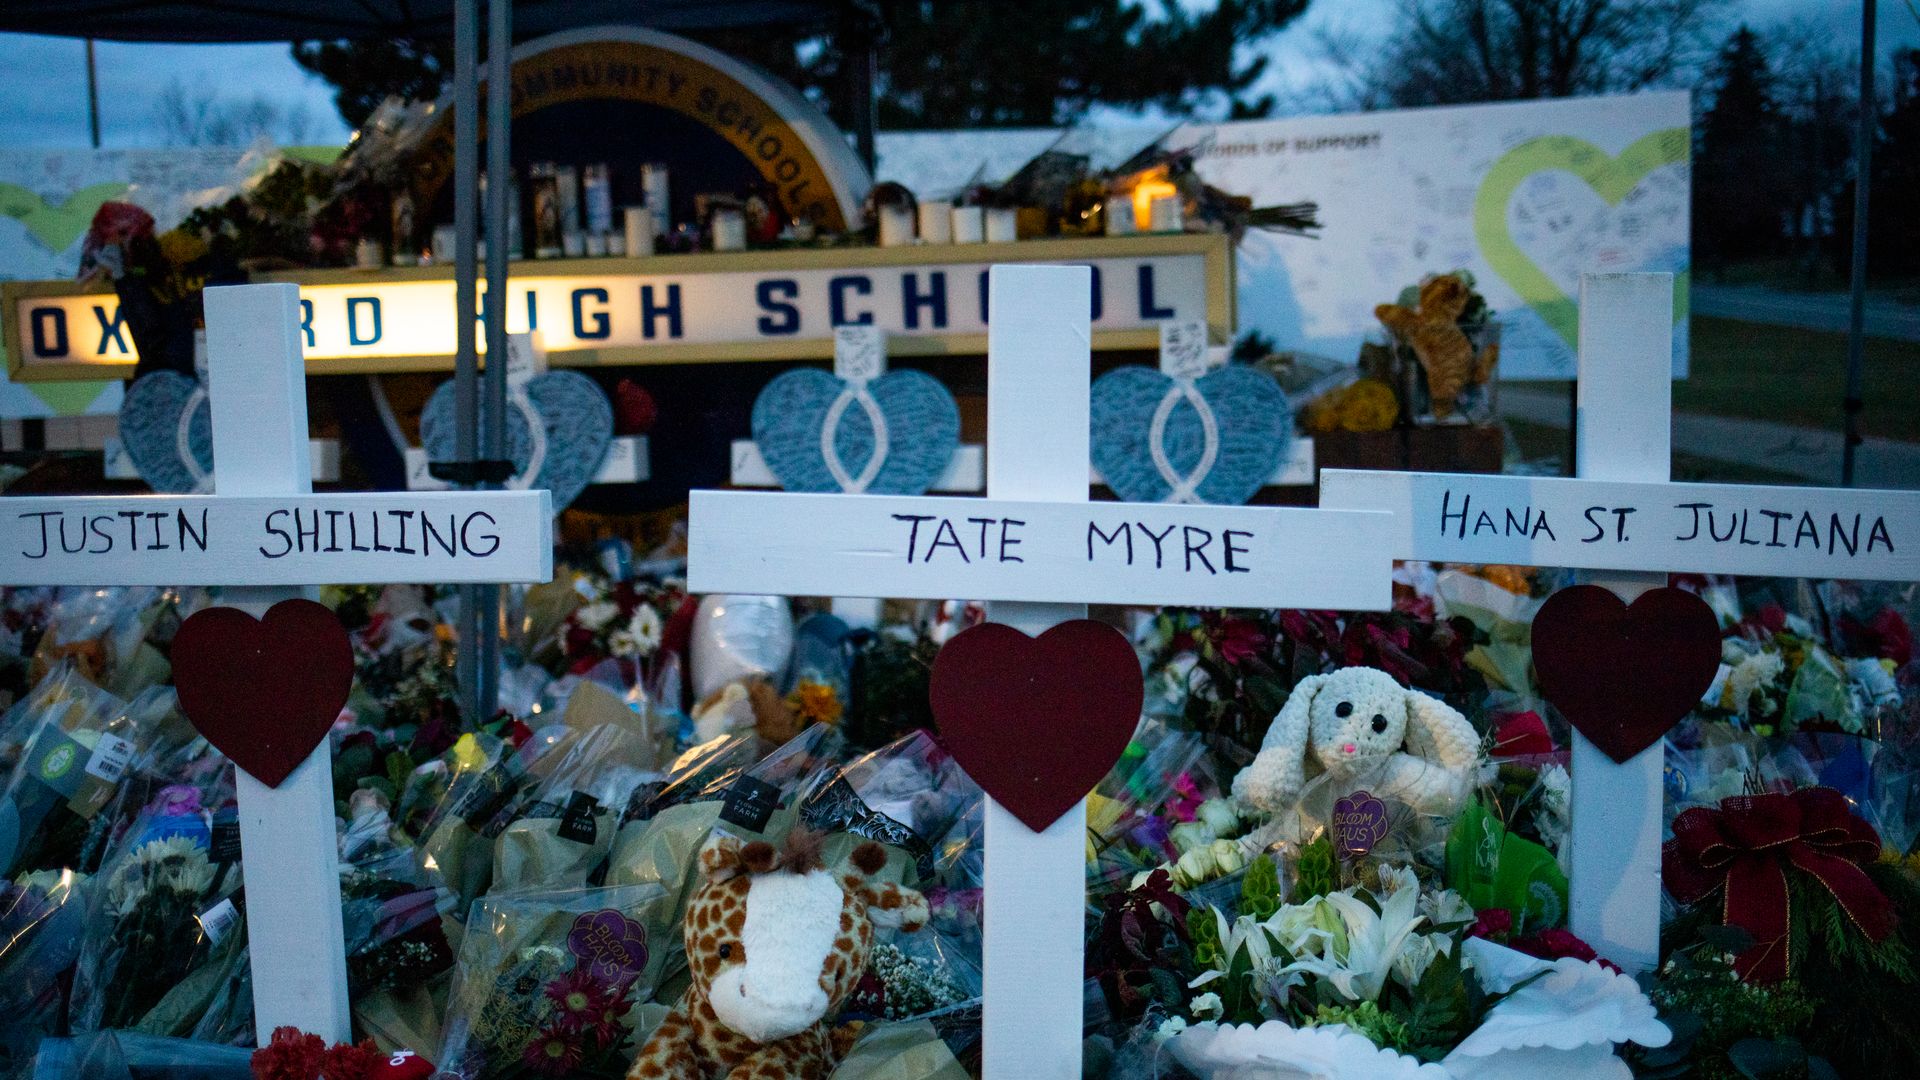 Photo of a memorial in front of the Oxford High School sign